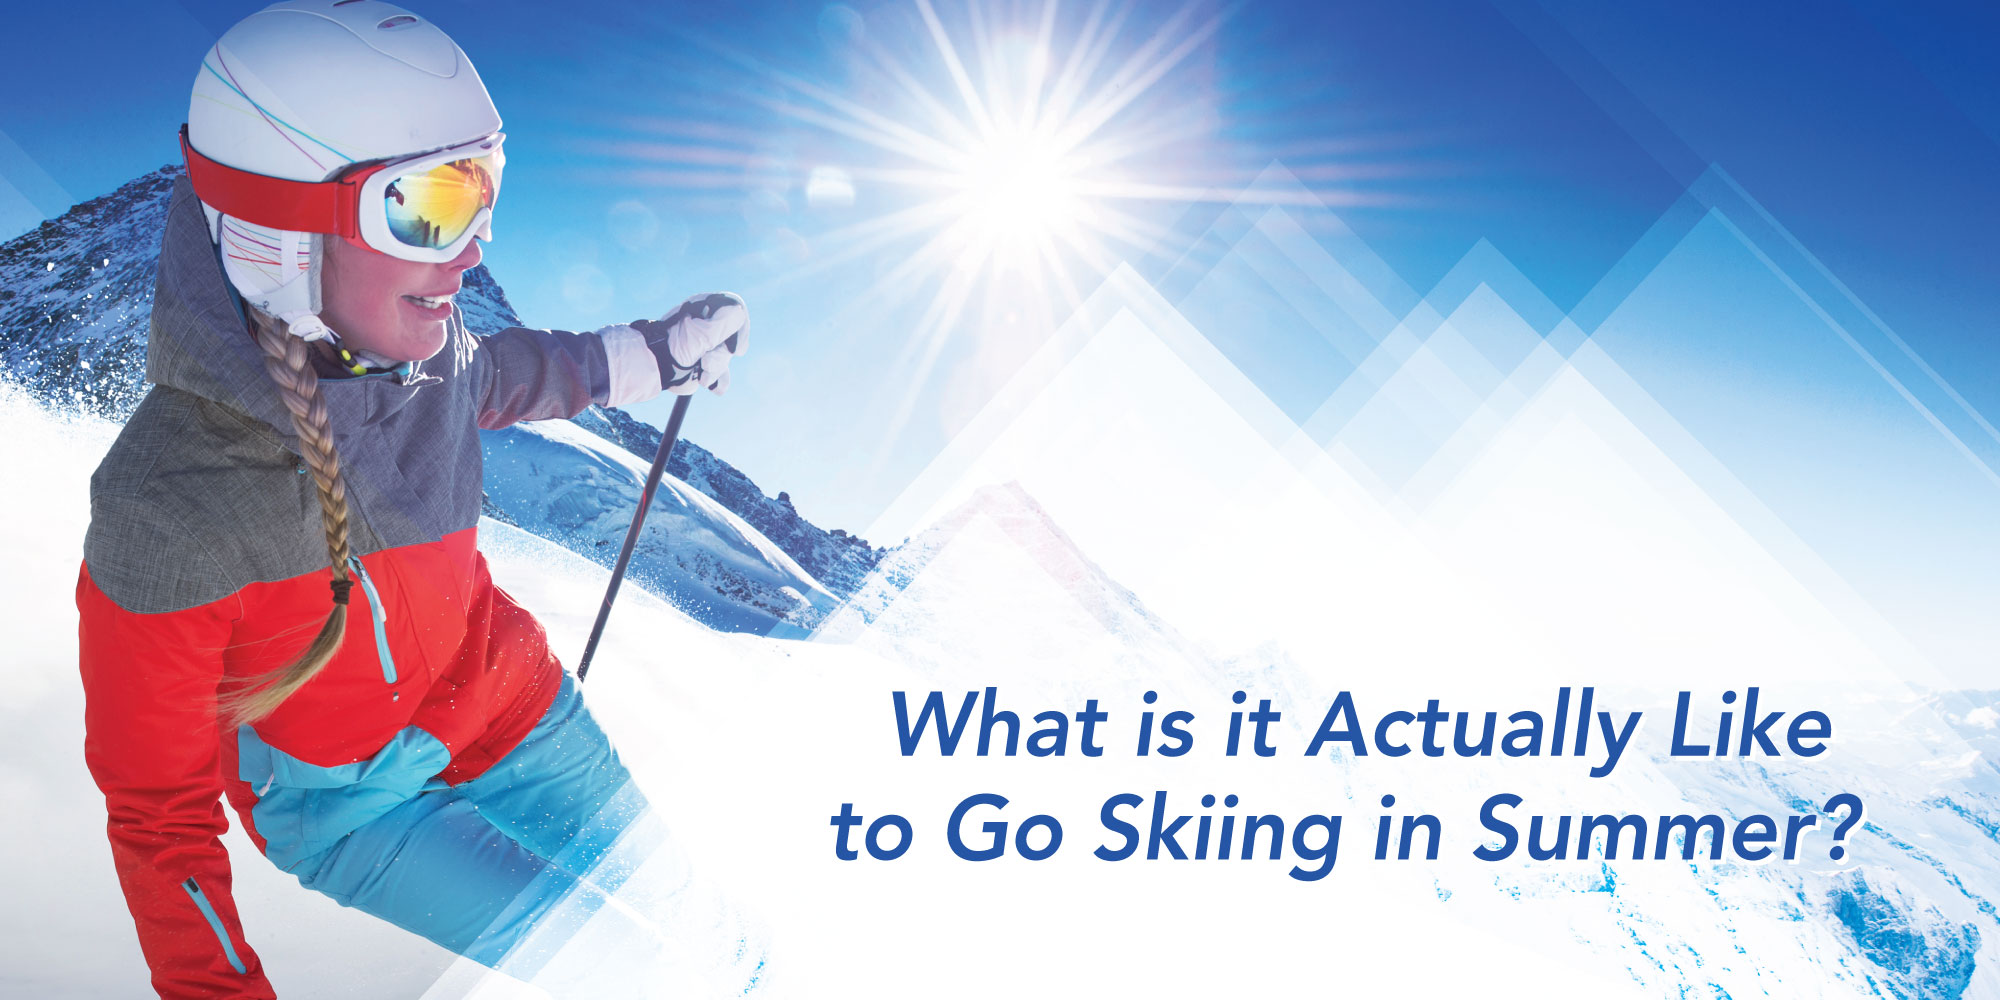 What Is It Actually Like to Go Skiing in Summer? - Alps2Alps Transfer Blog